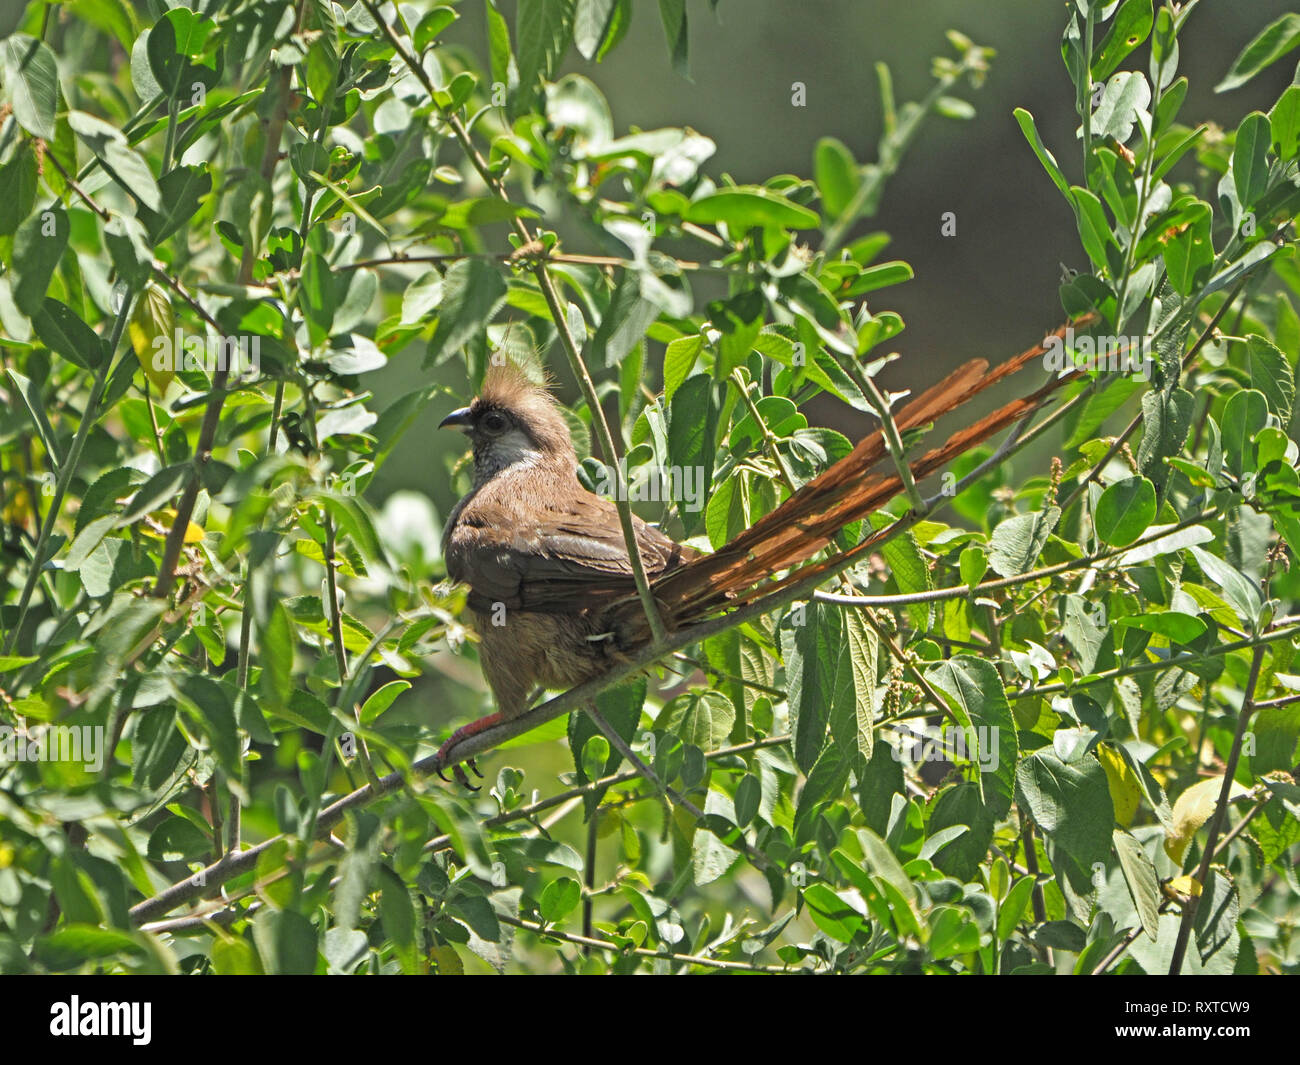 Speckled Mousebird (Colius striatus) with its long brown tail tangled in foliage of a shrubby tree in Nairobi National Park Kenya, Africa Stock Photo